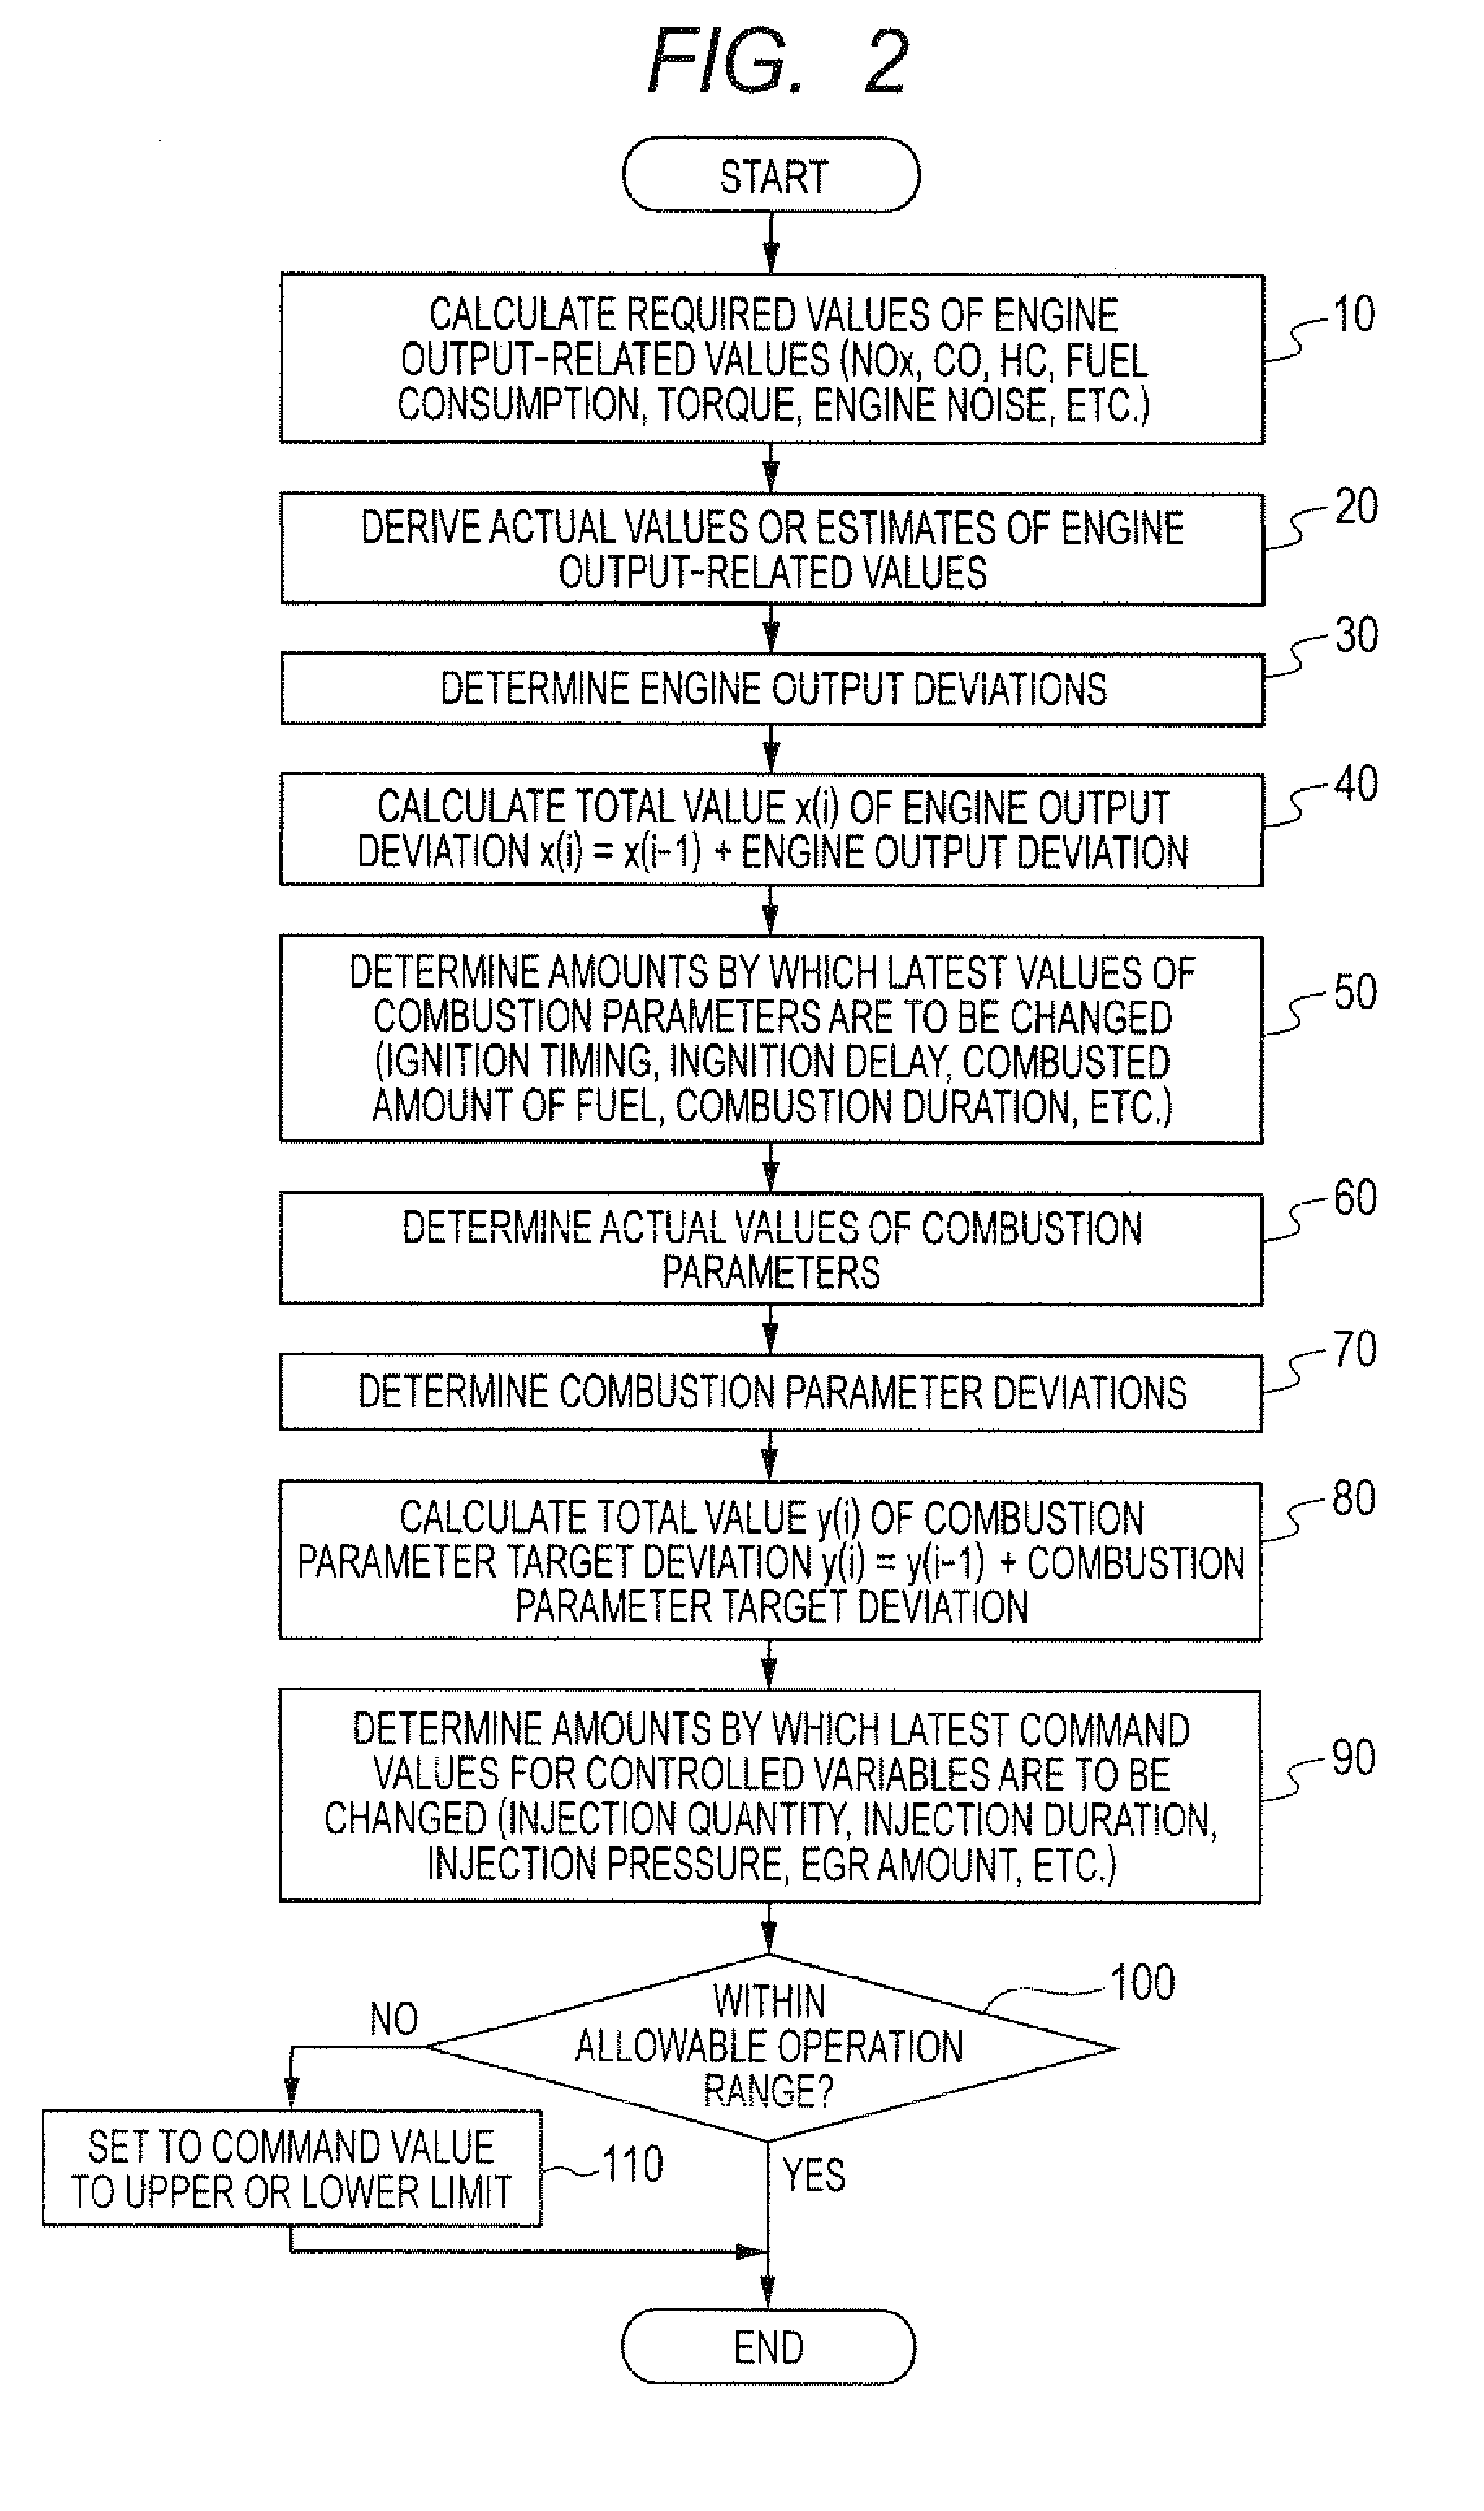 Engine control system with algorithm for actuator control